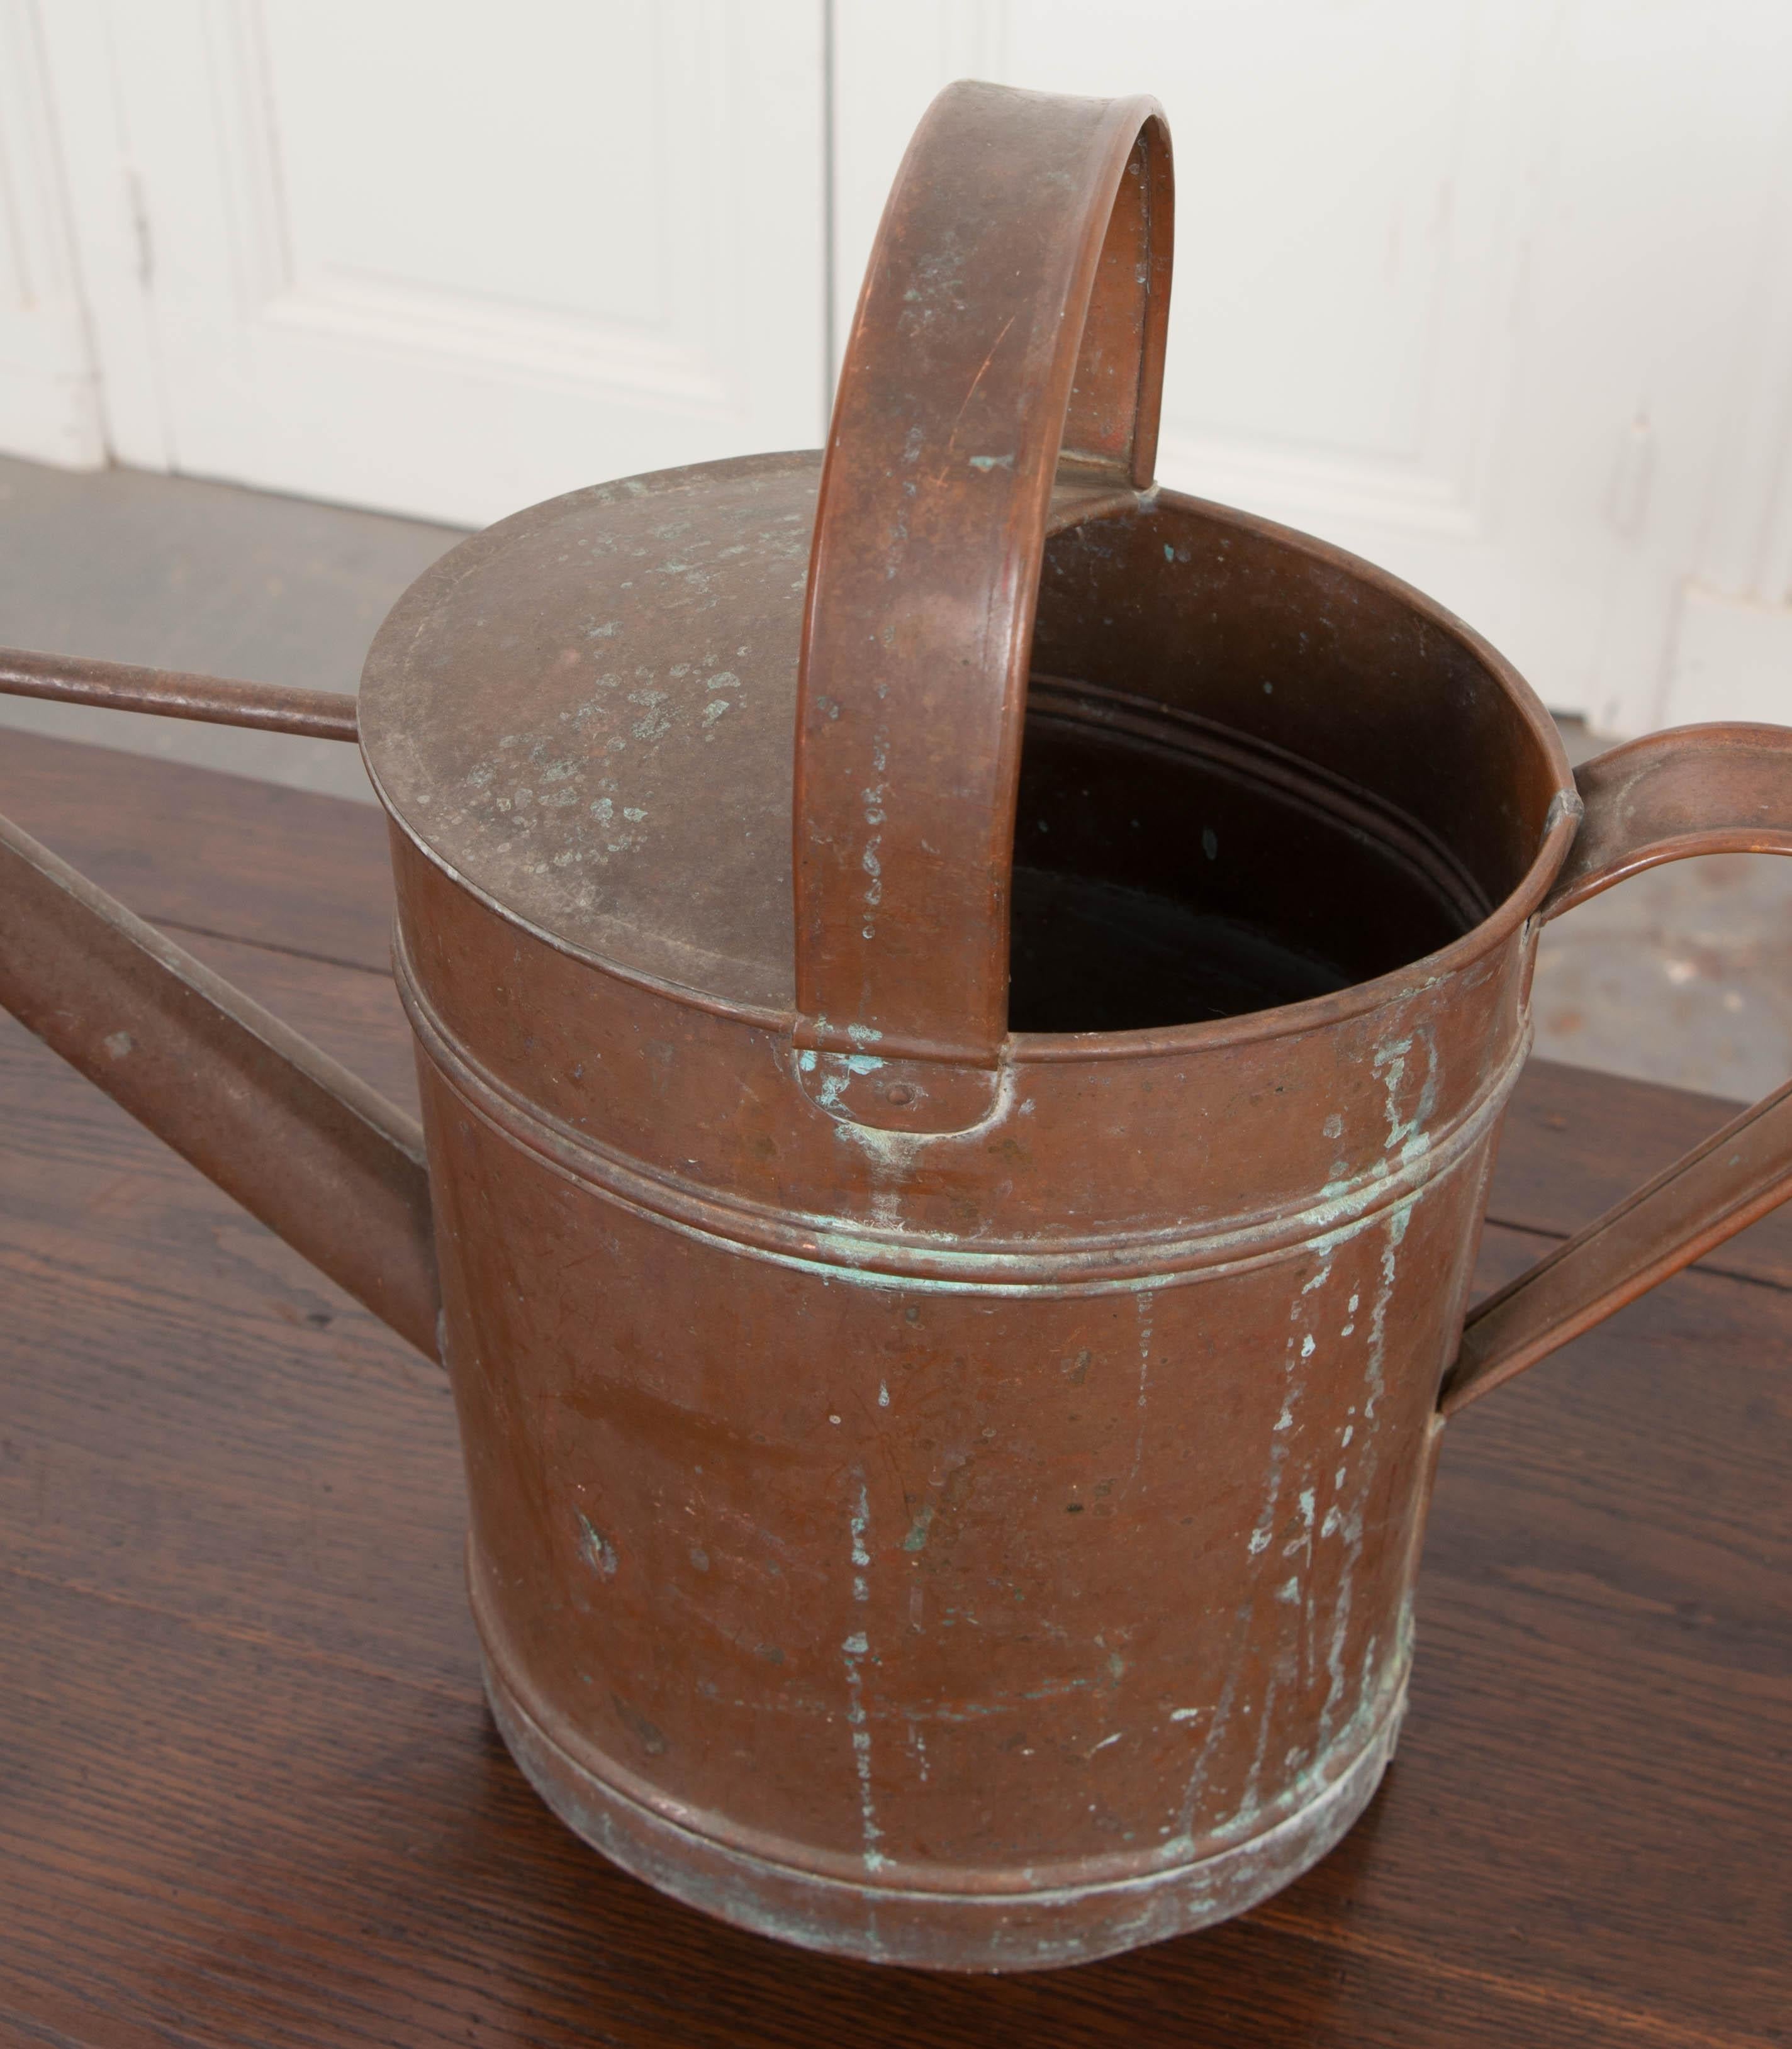 This delightful copper watering can, circa 1910s, is from England and will make tending to your garden very convenient!